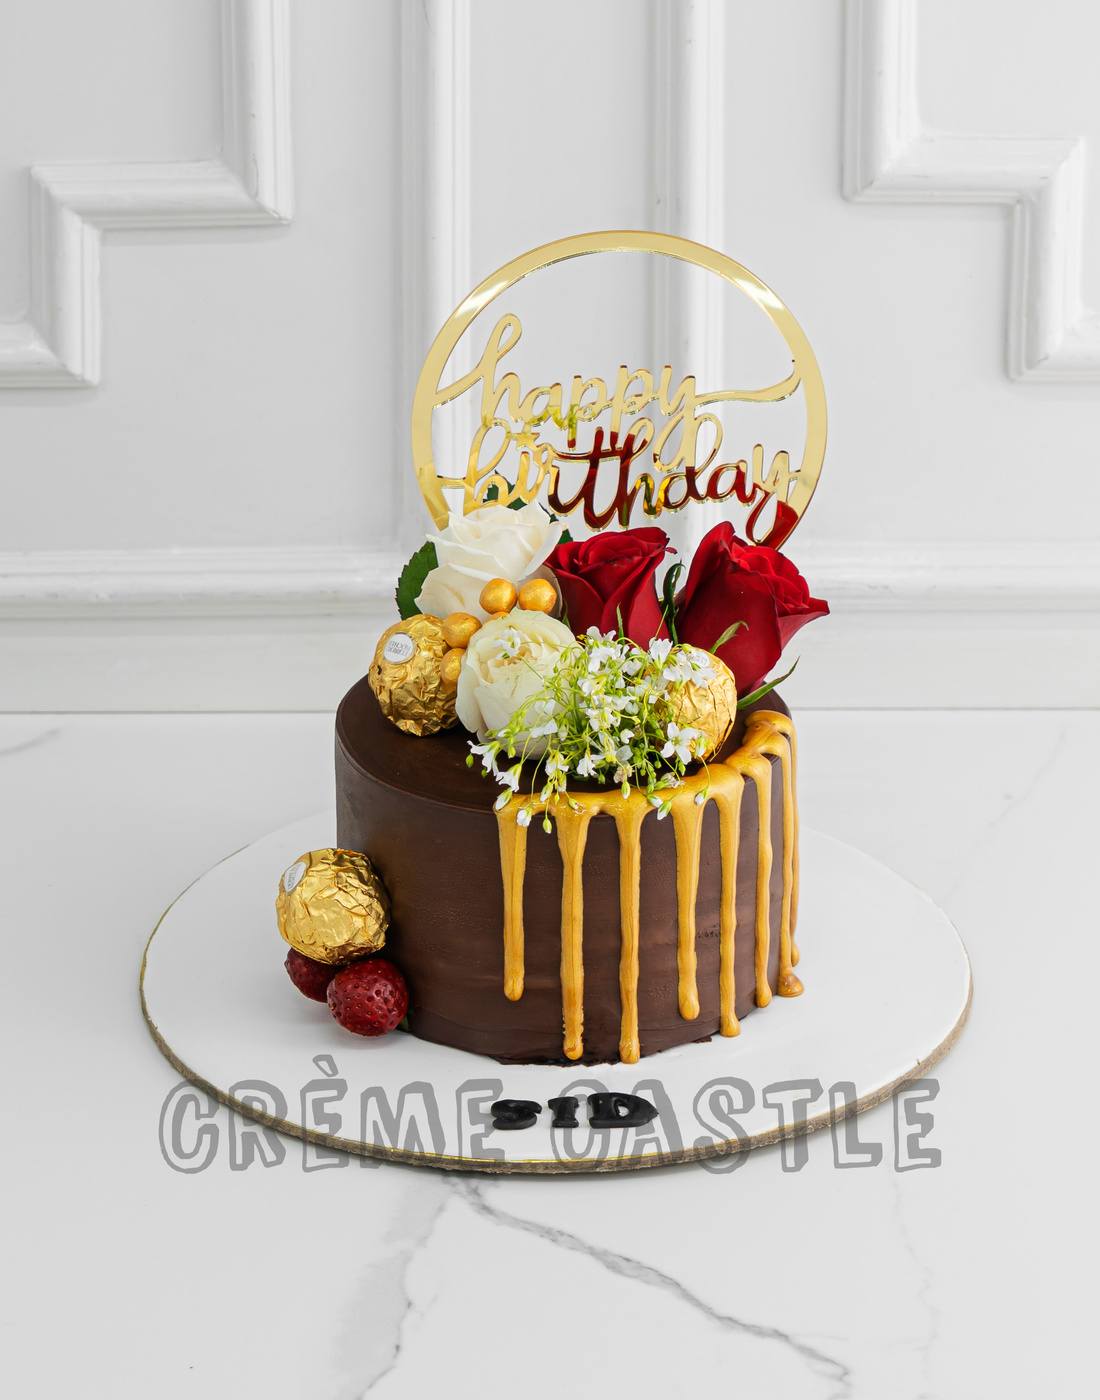 Chocolate Floral and Drip cake - Creme Castle